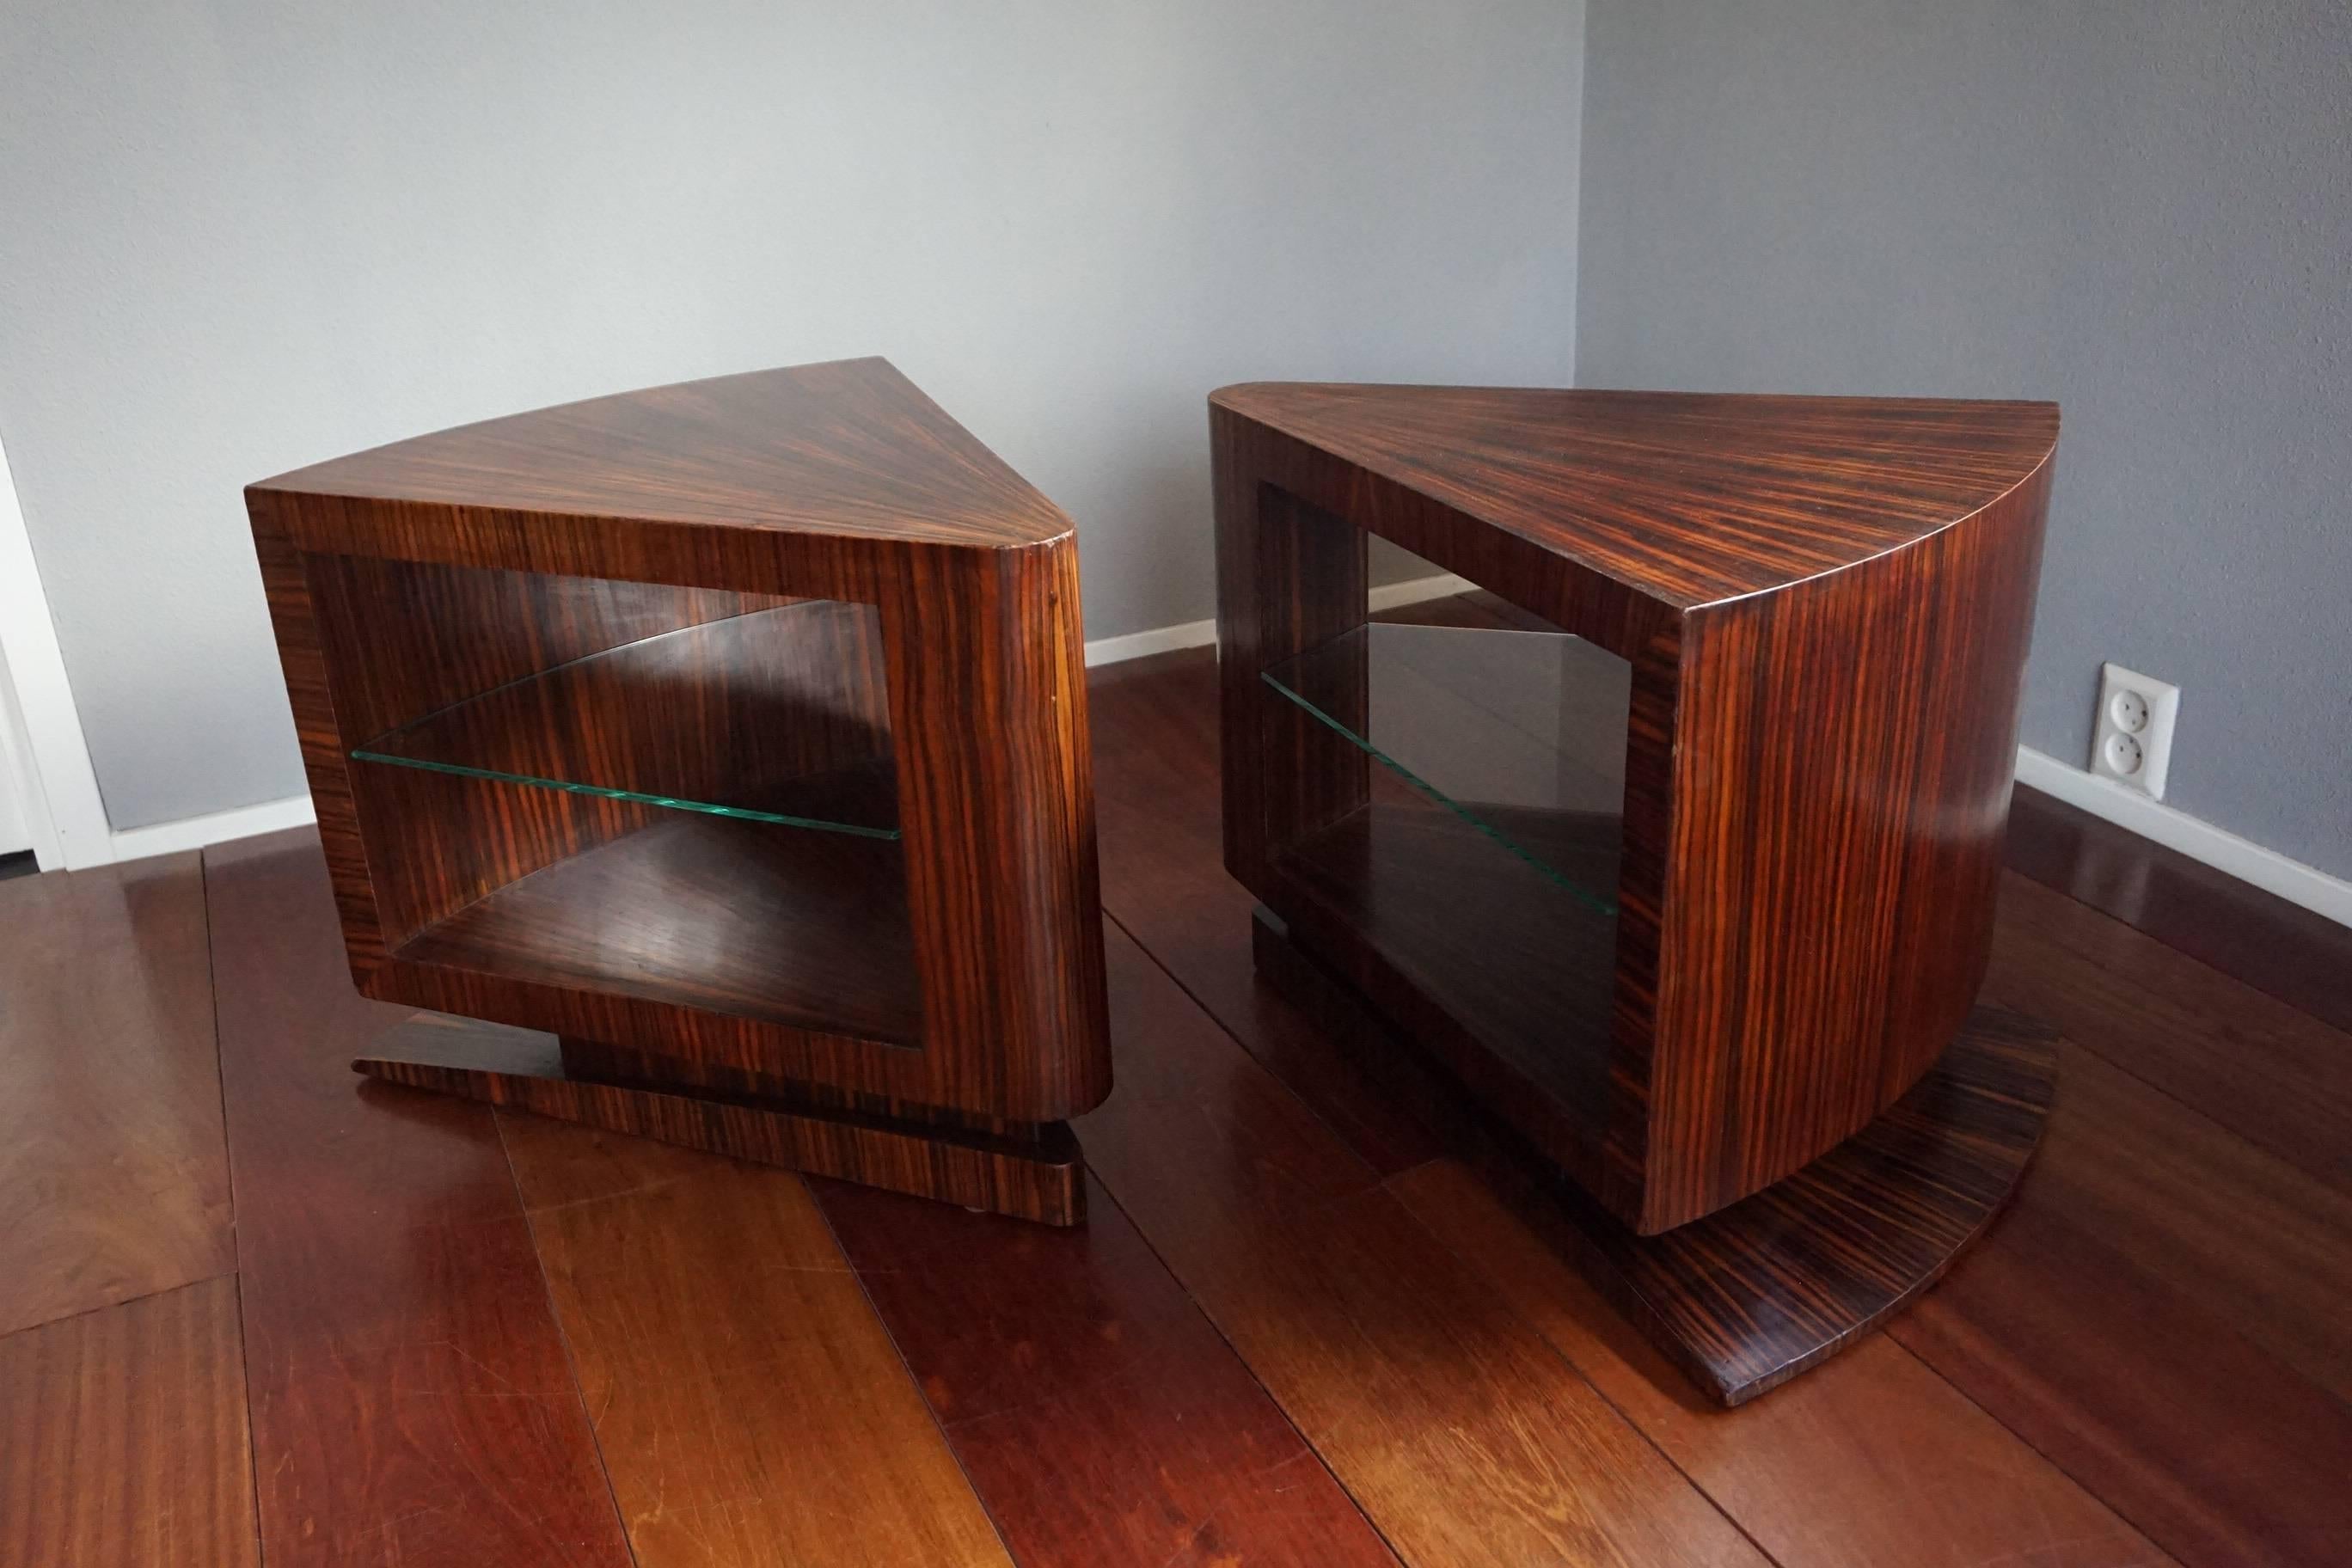 20th Century Unique Pair of Art Deco Coffee or Bedside Tables with Beveled Glass Tops